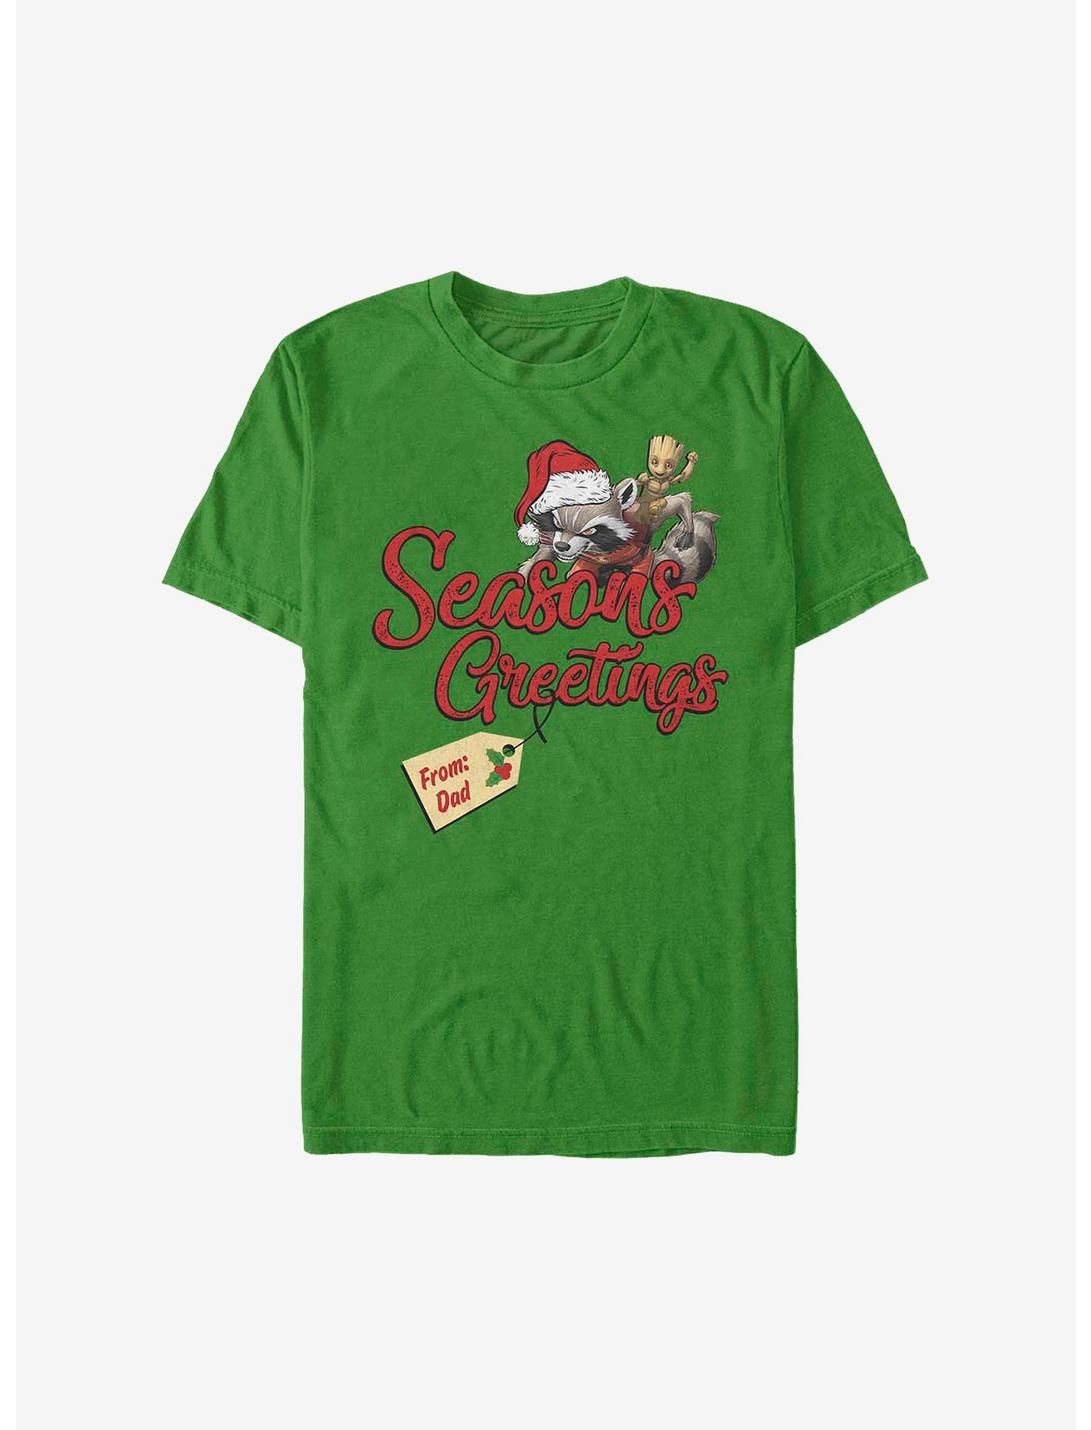 Marvel Guardians Of The Galaxy Seasons Greetings From Dad Holiday T-Shirt, KELLY, hi-res